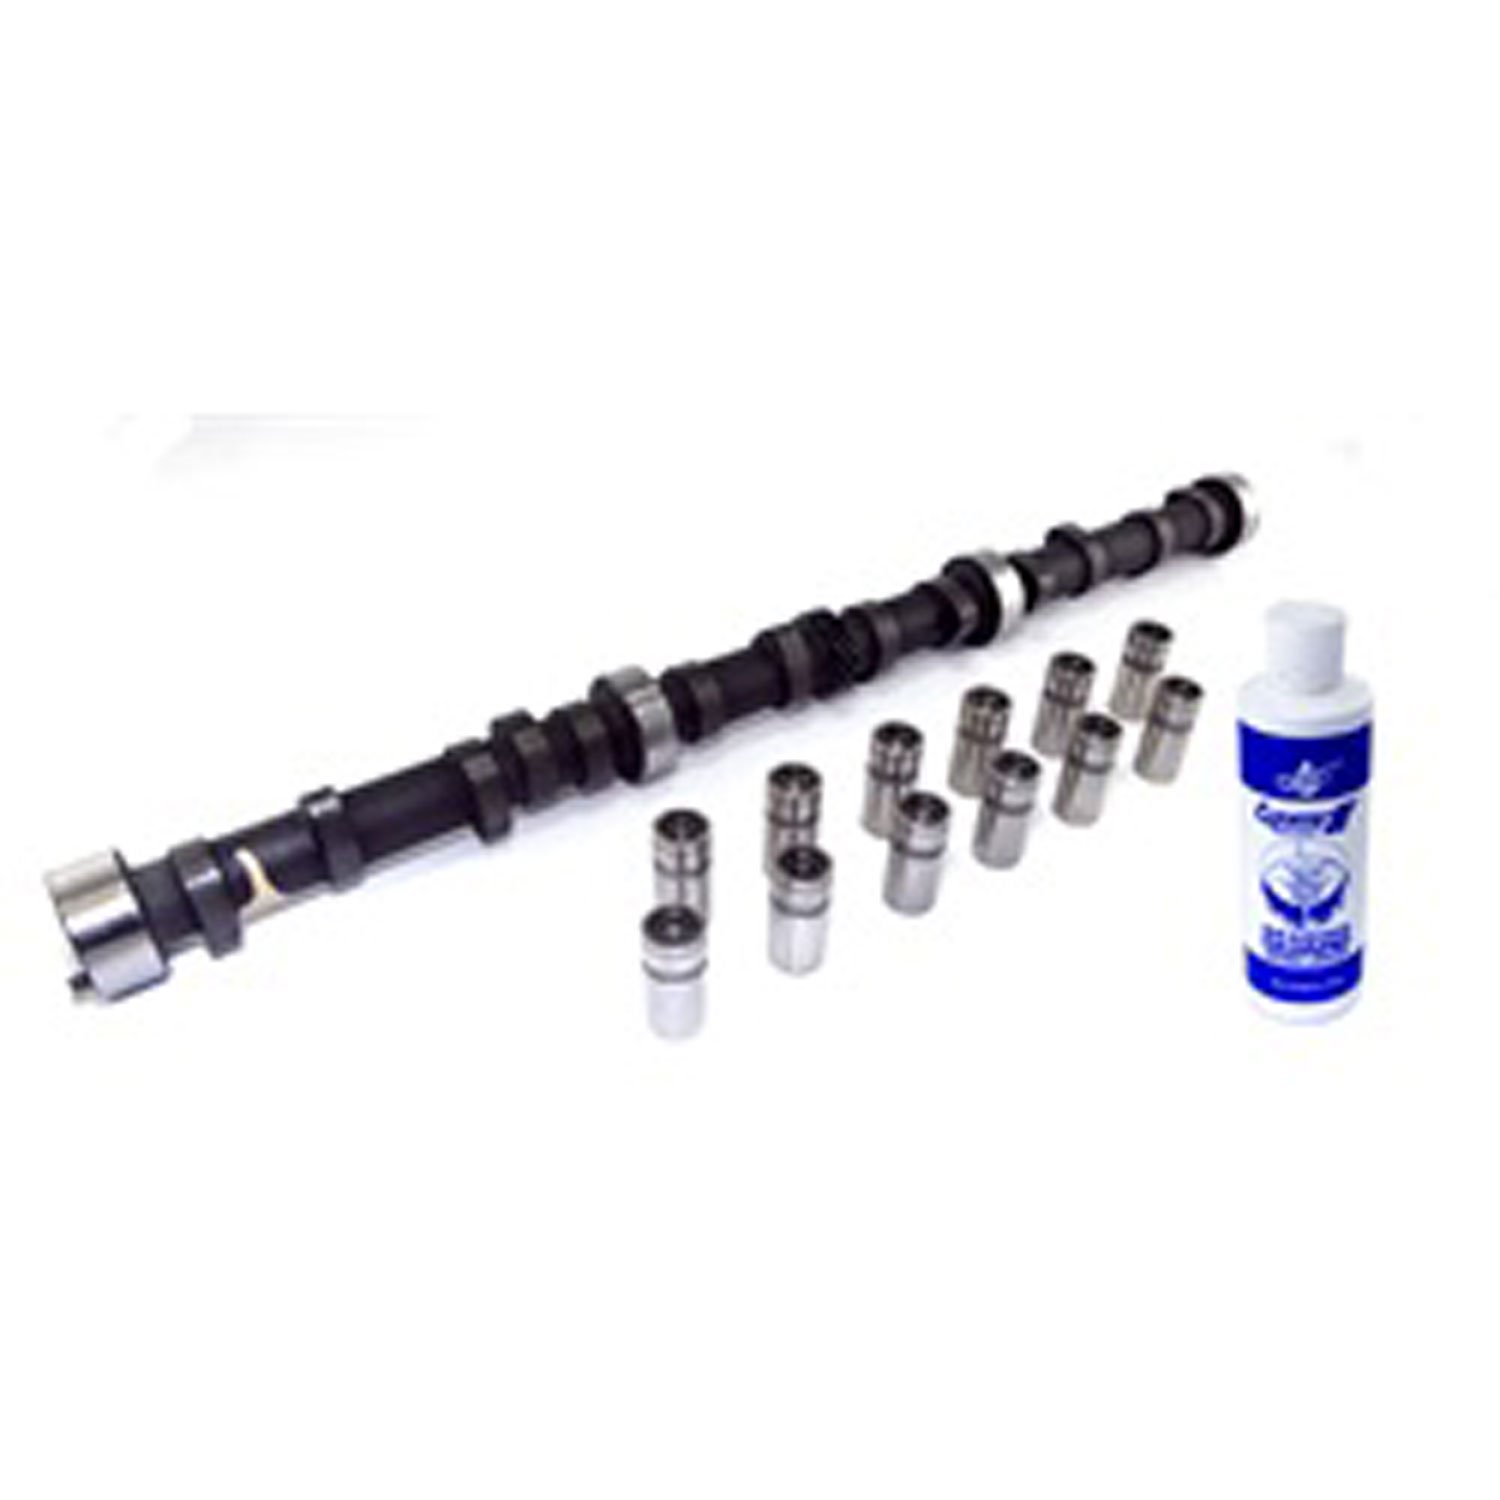 Camshaft Kit 4.2L Includes Camshaft Lube and Lifters